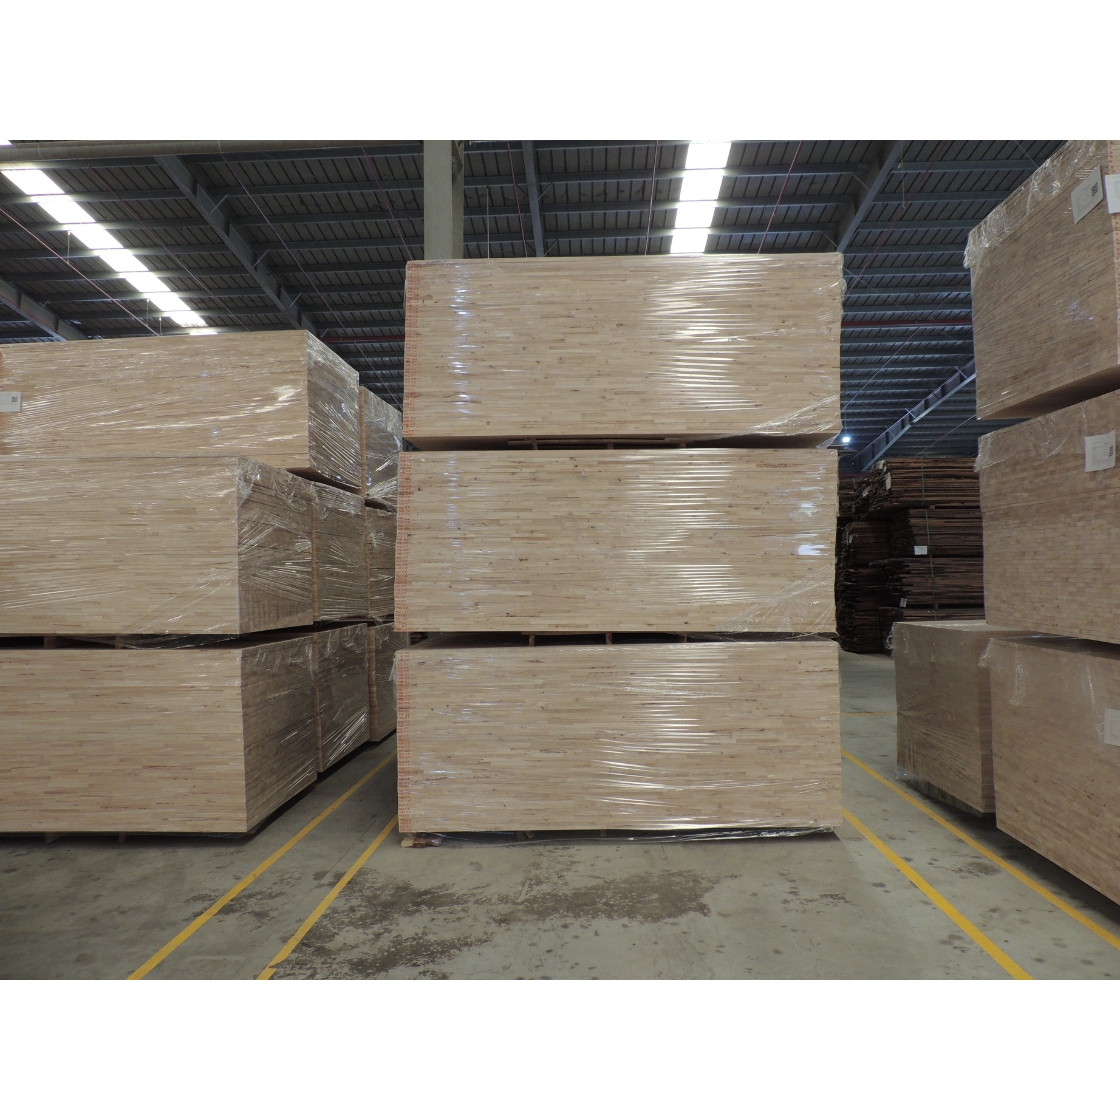 Rubber Wood Professional Team Rubber Wood Indoor Furniture Fsc-Coc Customized Packaging Made In Vietnam Manufacturer